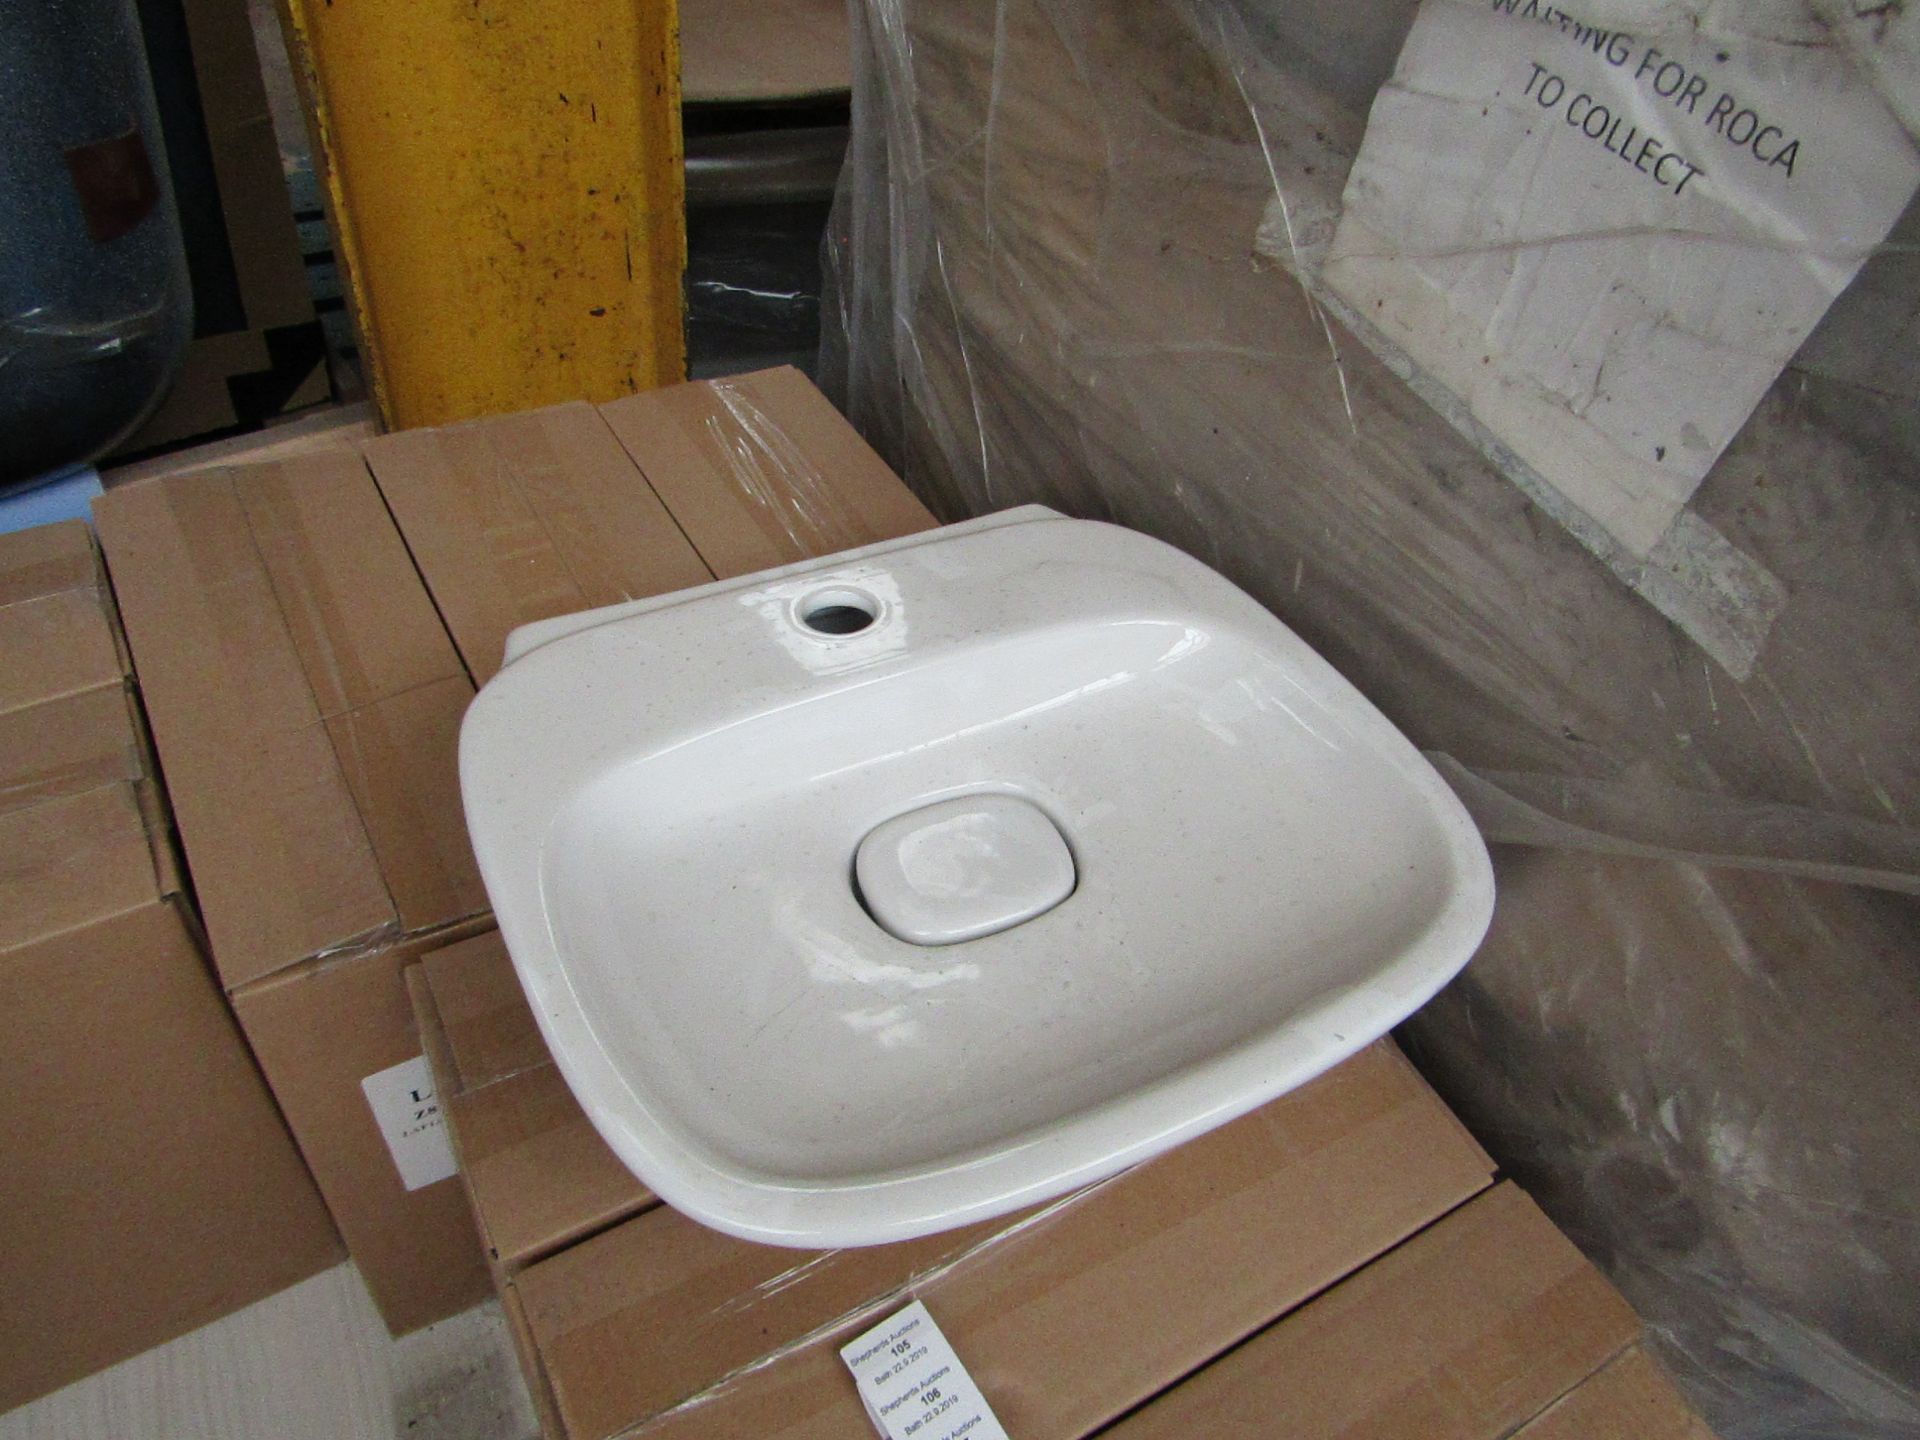 Laufen Made 500mm sink with ceramic plug cover and mono block mixer tap, new and boxed